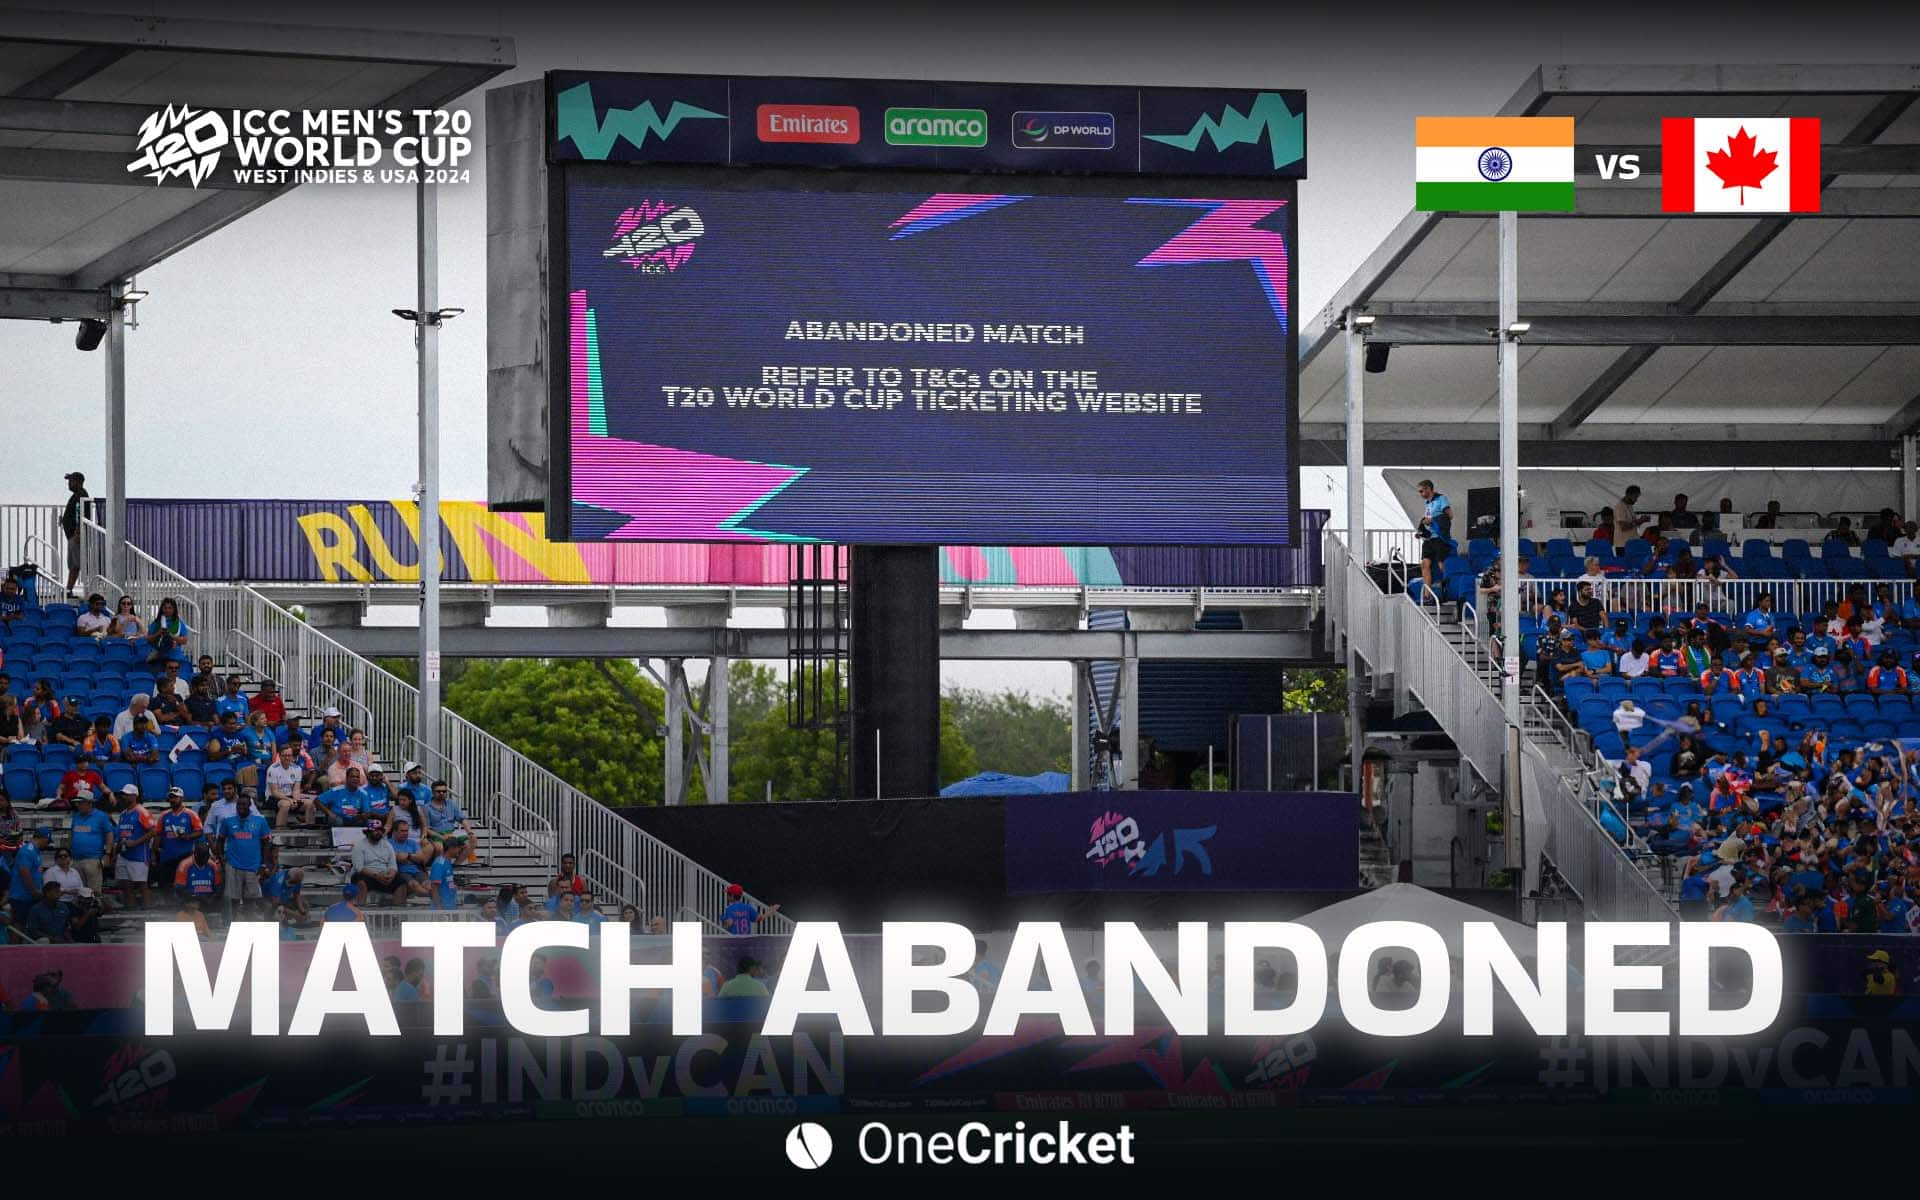 India vs Canada game has been called off (X.com)